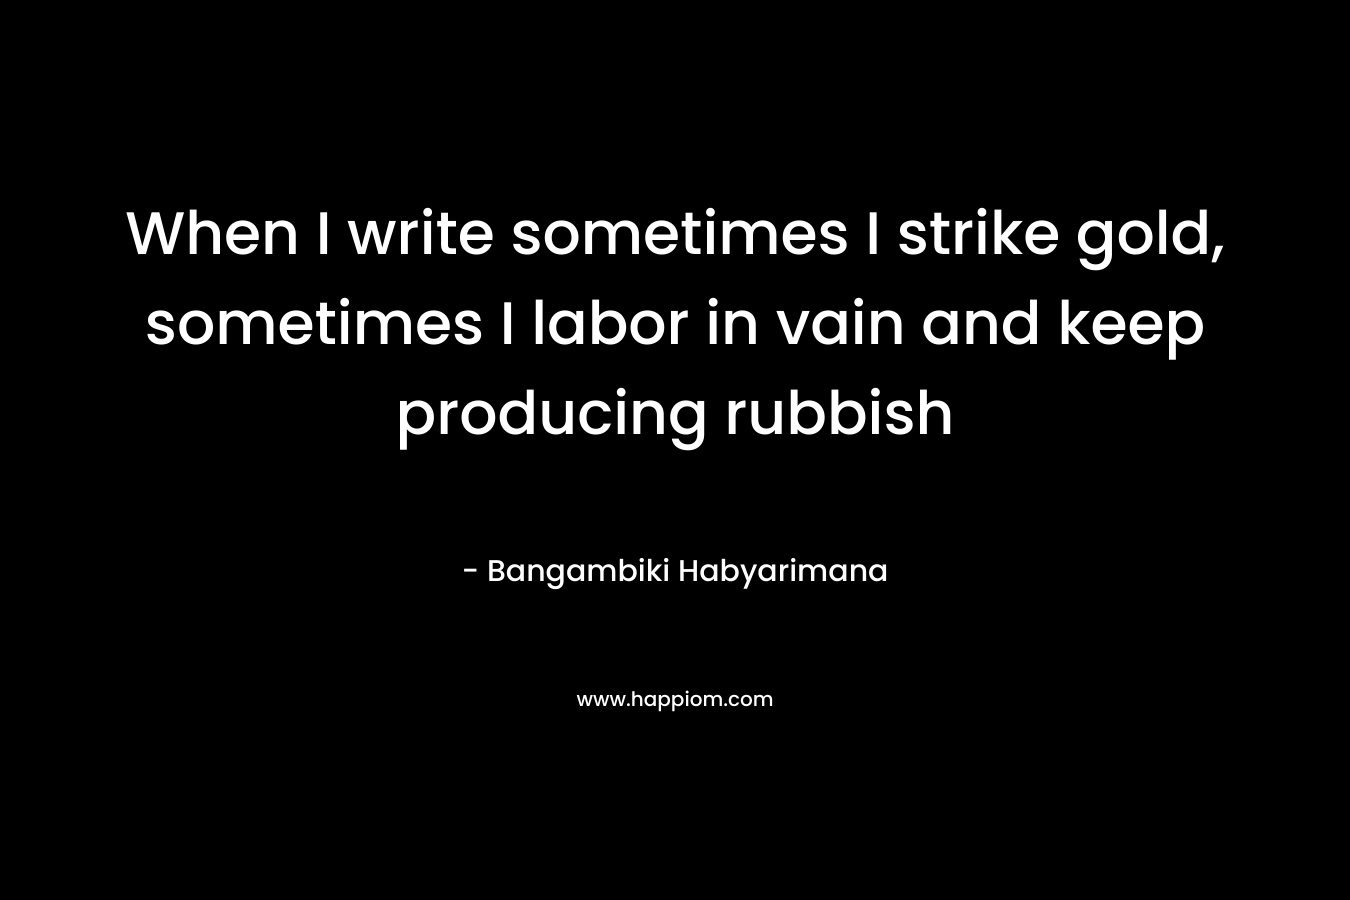 When I write sometimes I strike gold, sometimes I labor in vain and keep producing rubbish